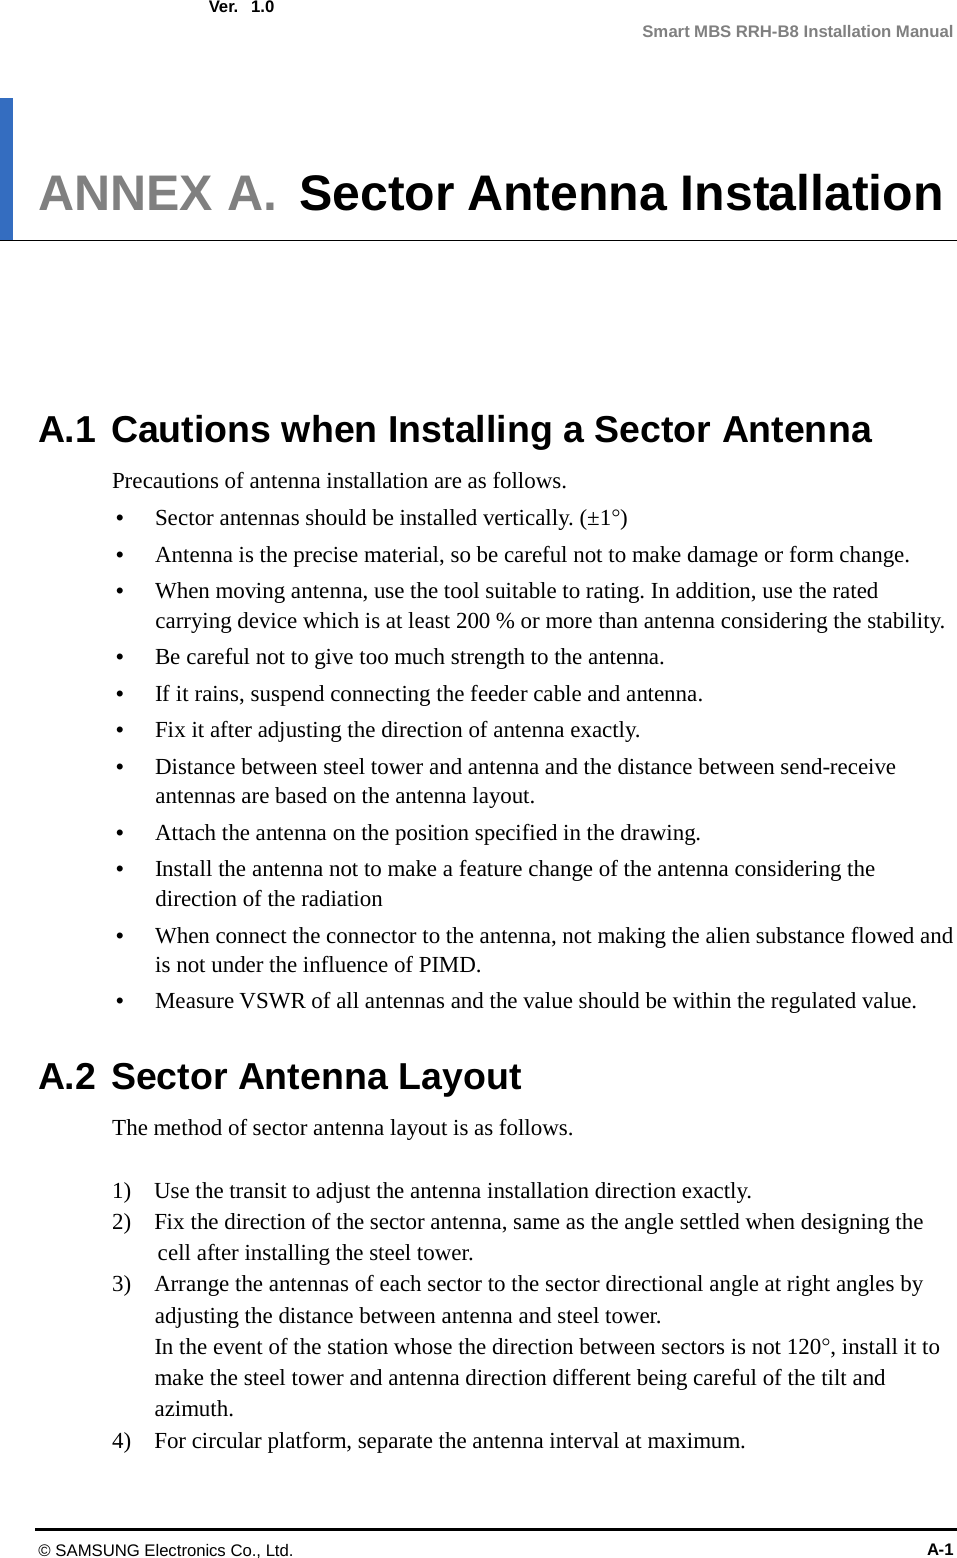  Ver.  Smart MBS RRH-B8 Installation Manual 1.0 ANNEX A. Sector Antenna Installation      A.1 Cautions when Installing a Sector Antenna Precautions of antenna installation are as follows.  Sector antennas should be installed vertically. (±1°)  Antenna is the precise material, so be careful not to make damage or form change.    When moving antenna, use the tool suitable to rating. In addition, use the rated carrying device which is at least 200 % or more than antenna considering the stability.  Be careful not to give too much strength to the antenna.    If it rains, suspend connecting the feeder cable and antenna.    Fix it after adjusting the direction of antenna exactly.    Distance between steel tower and antenna and the distance between send-receive antennas are based on the antenna layout.  Attach the antenna on the position specified in the drawing.    Install the antenna not to make a feature change of the antenna considering the direction of the radiation    When connect the connector to the antenna, not making the alien substance flowed and is not under the influence of PIMD.    Measure VSWR of all antennas and the value should be within the regulated value.  A.2 Sector Antenna Layout The method of sector antenna layout is as follows.  1)    Use the transit to adjust the antenna installation direction exactly. 2)    Fix the direction of the sector antenna, same as the angle settled when designing the cell after installing the steel tower. 3)    Arrange the antennas of each sector to the sector directional angle at right angles by adjusting the distance between antenna and steel tower. In the event of the station whose the direction between sectors is not 120°, install it to make the steel tower and antenna direction different being careful of the tilt and azimuth. 4)    For circular platform, separate the antenna interval at maximum.  © SAMSUNG Electronics Co., Ltd. A-1 